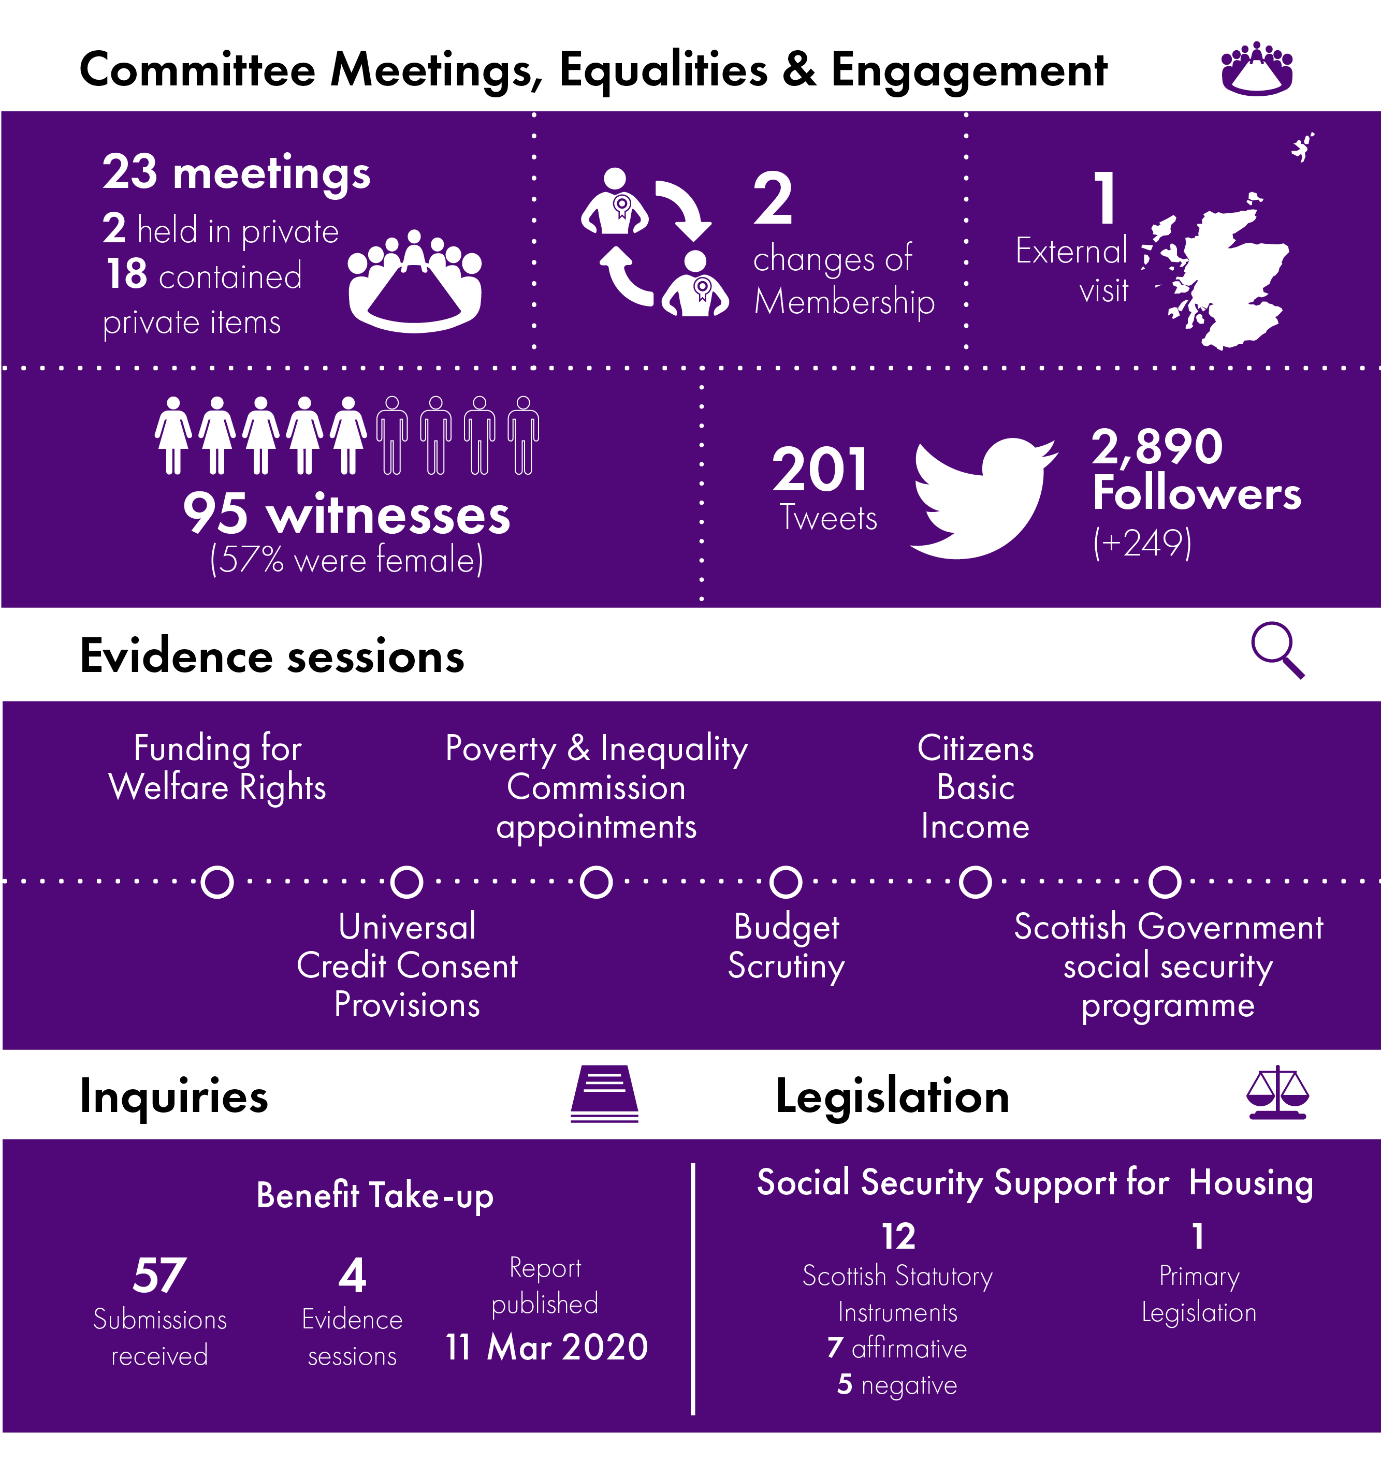 Infographic summarising the work of the Social Security Committee showing the number of meetings, evidence sessions held, inquiries undertaken and the legislation considered. Further detail is provided in the body of the report.